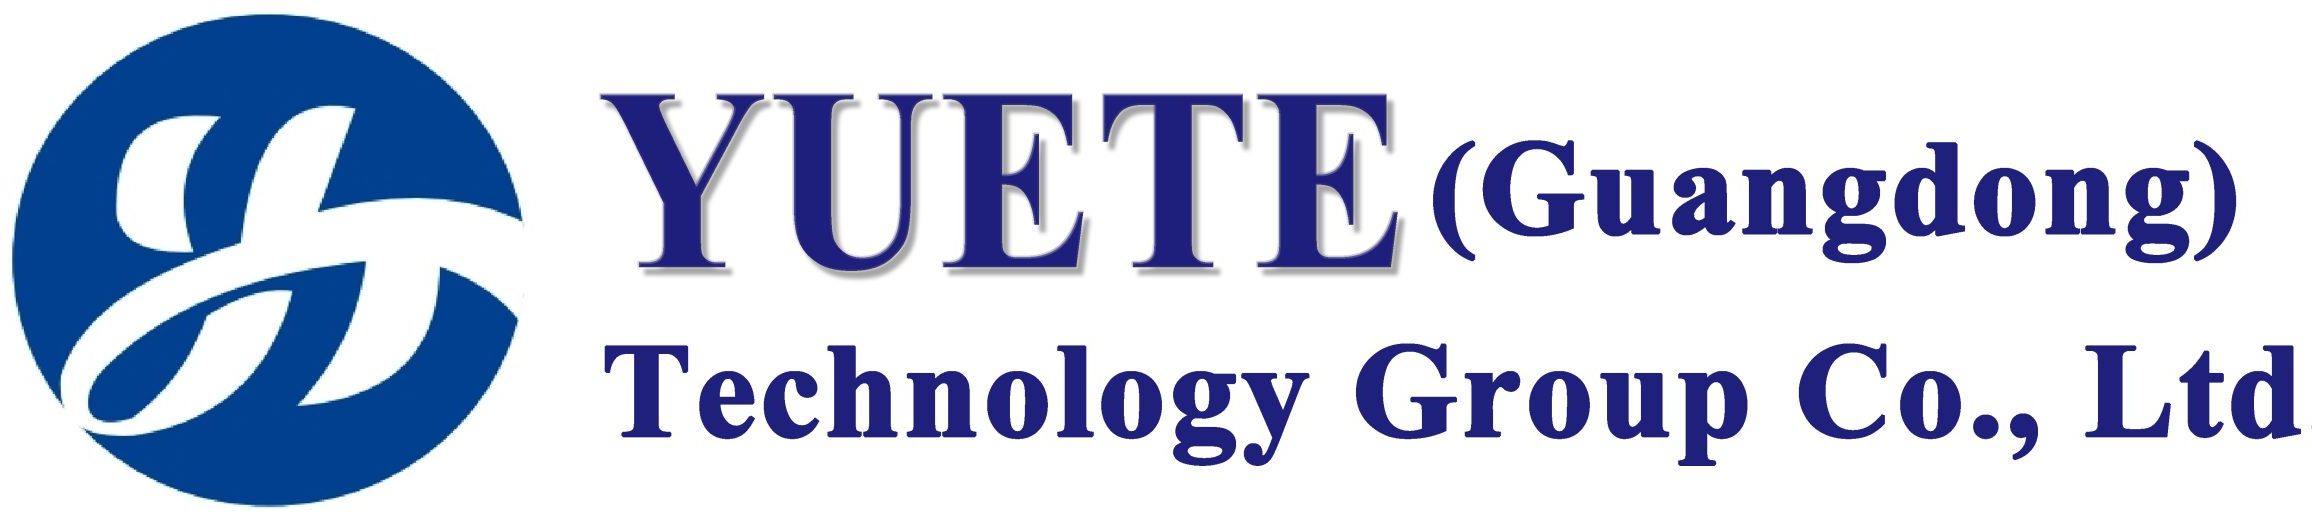 Yuete Electronic Technology (Beijing) Co., Ltd. – IC/Electronic Component Material Procurement Trading Platform